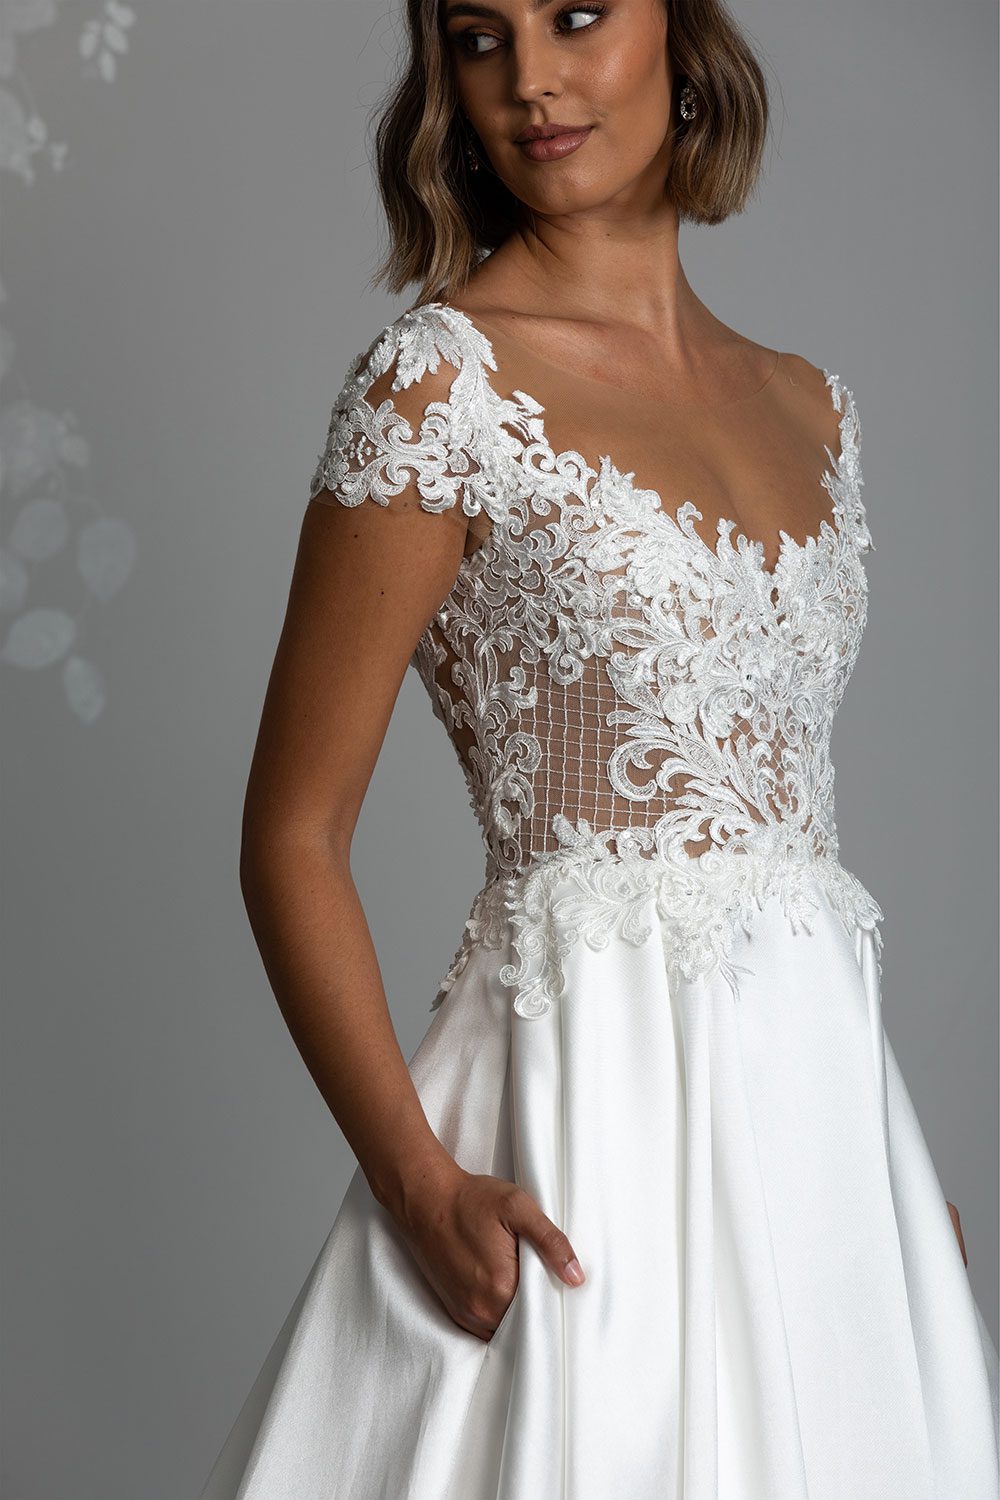 Leona Wedding Dress from Vinka Design. This gorgeous gown is hand appliqued with two complimentary laces on a nude tulle base, which creates a striking effect. Delicate cap sleeves flatter the arms whilst also drawing the eye to the slenderness of the waist. It has a low back edged with lace that cinches in the waist and is carefully styled to delicately finish into the dramatic skirt. Close up of front view of model showing long intricate lace bodice with cap sleeves and silk skirt with deep folds and pockets